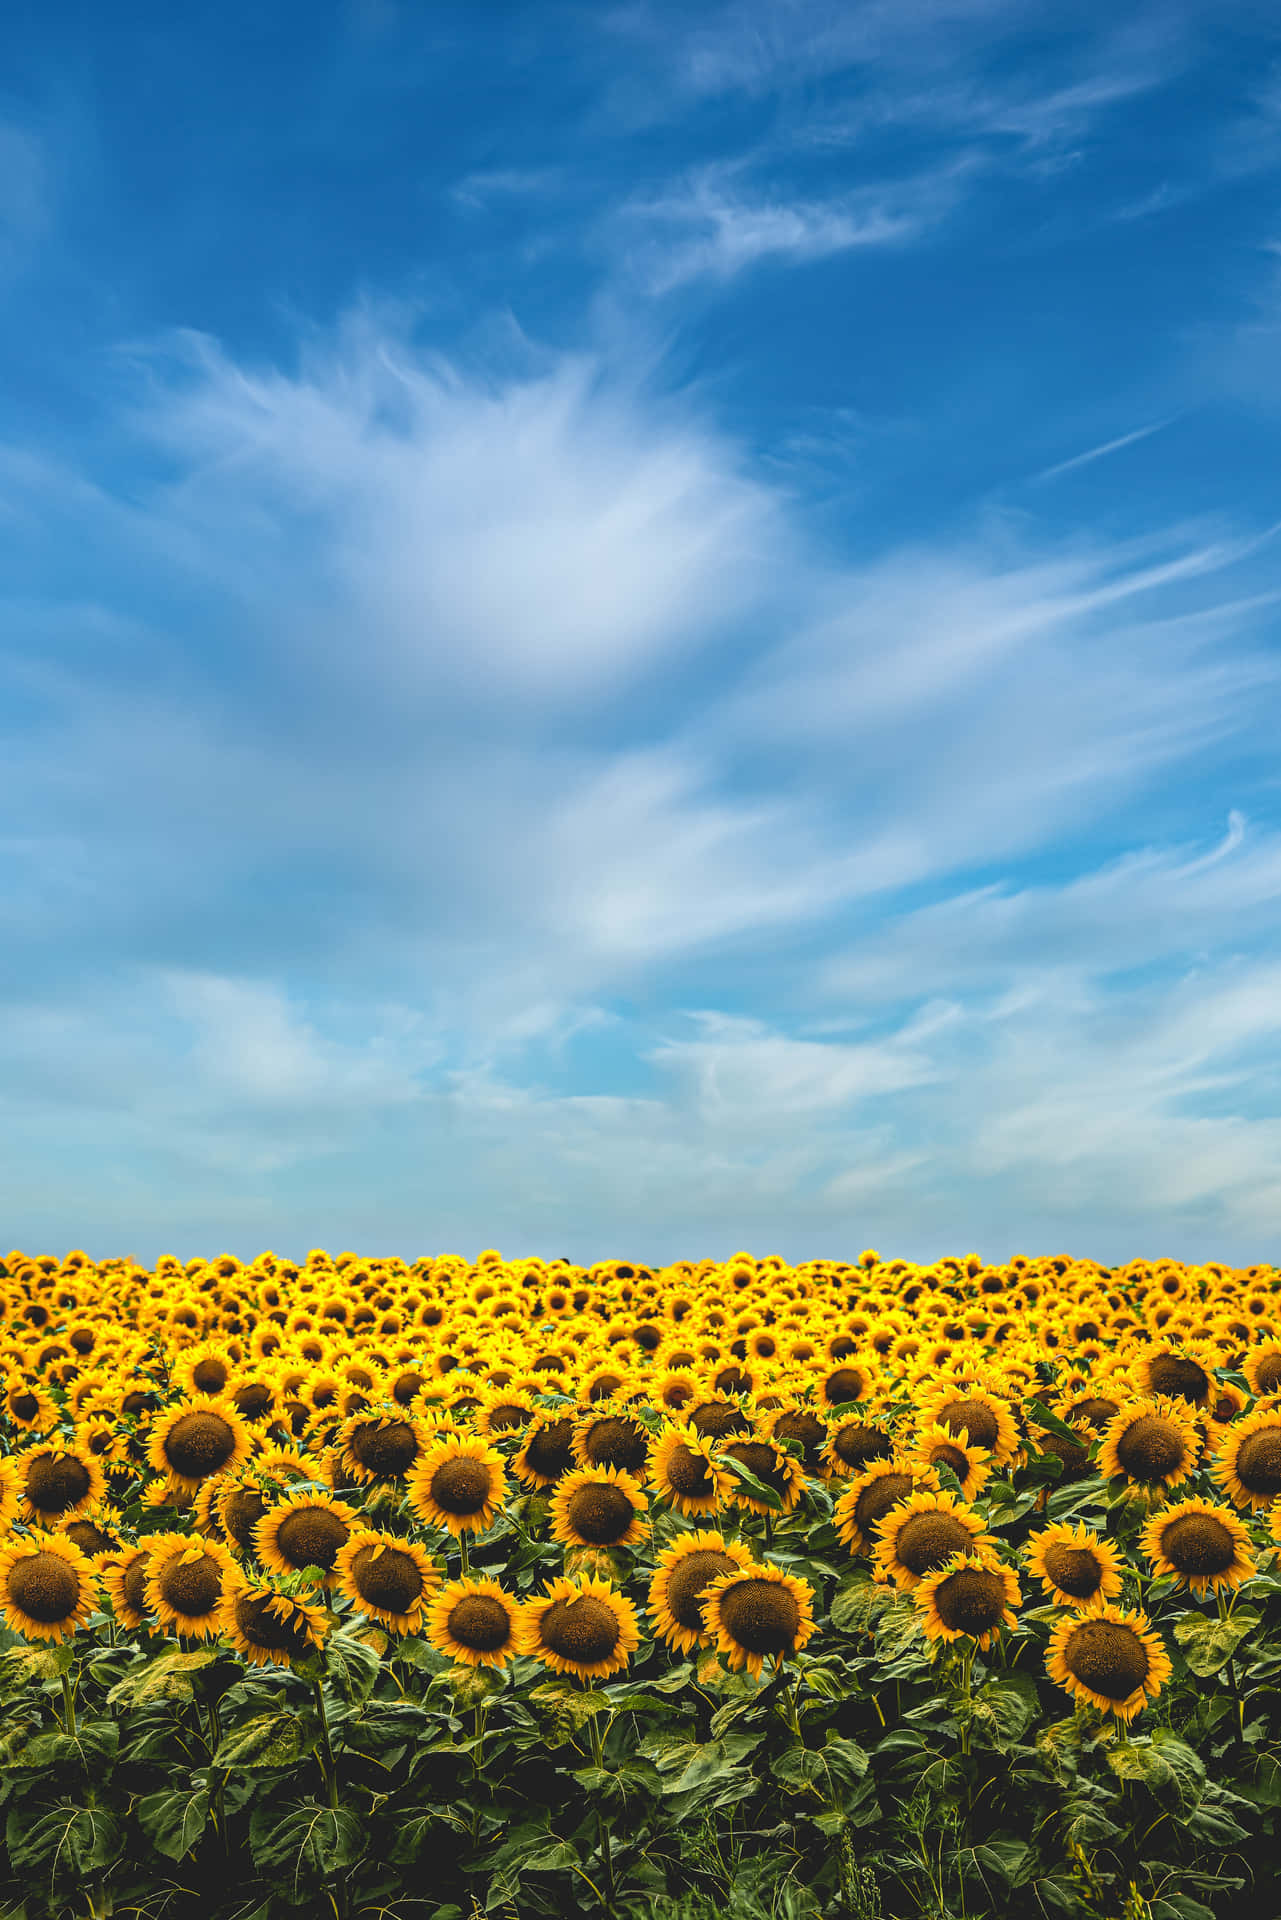 A picturesque view of a vibrant flower field